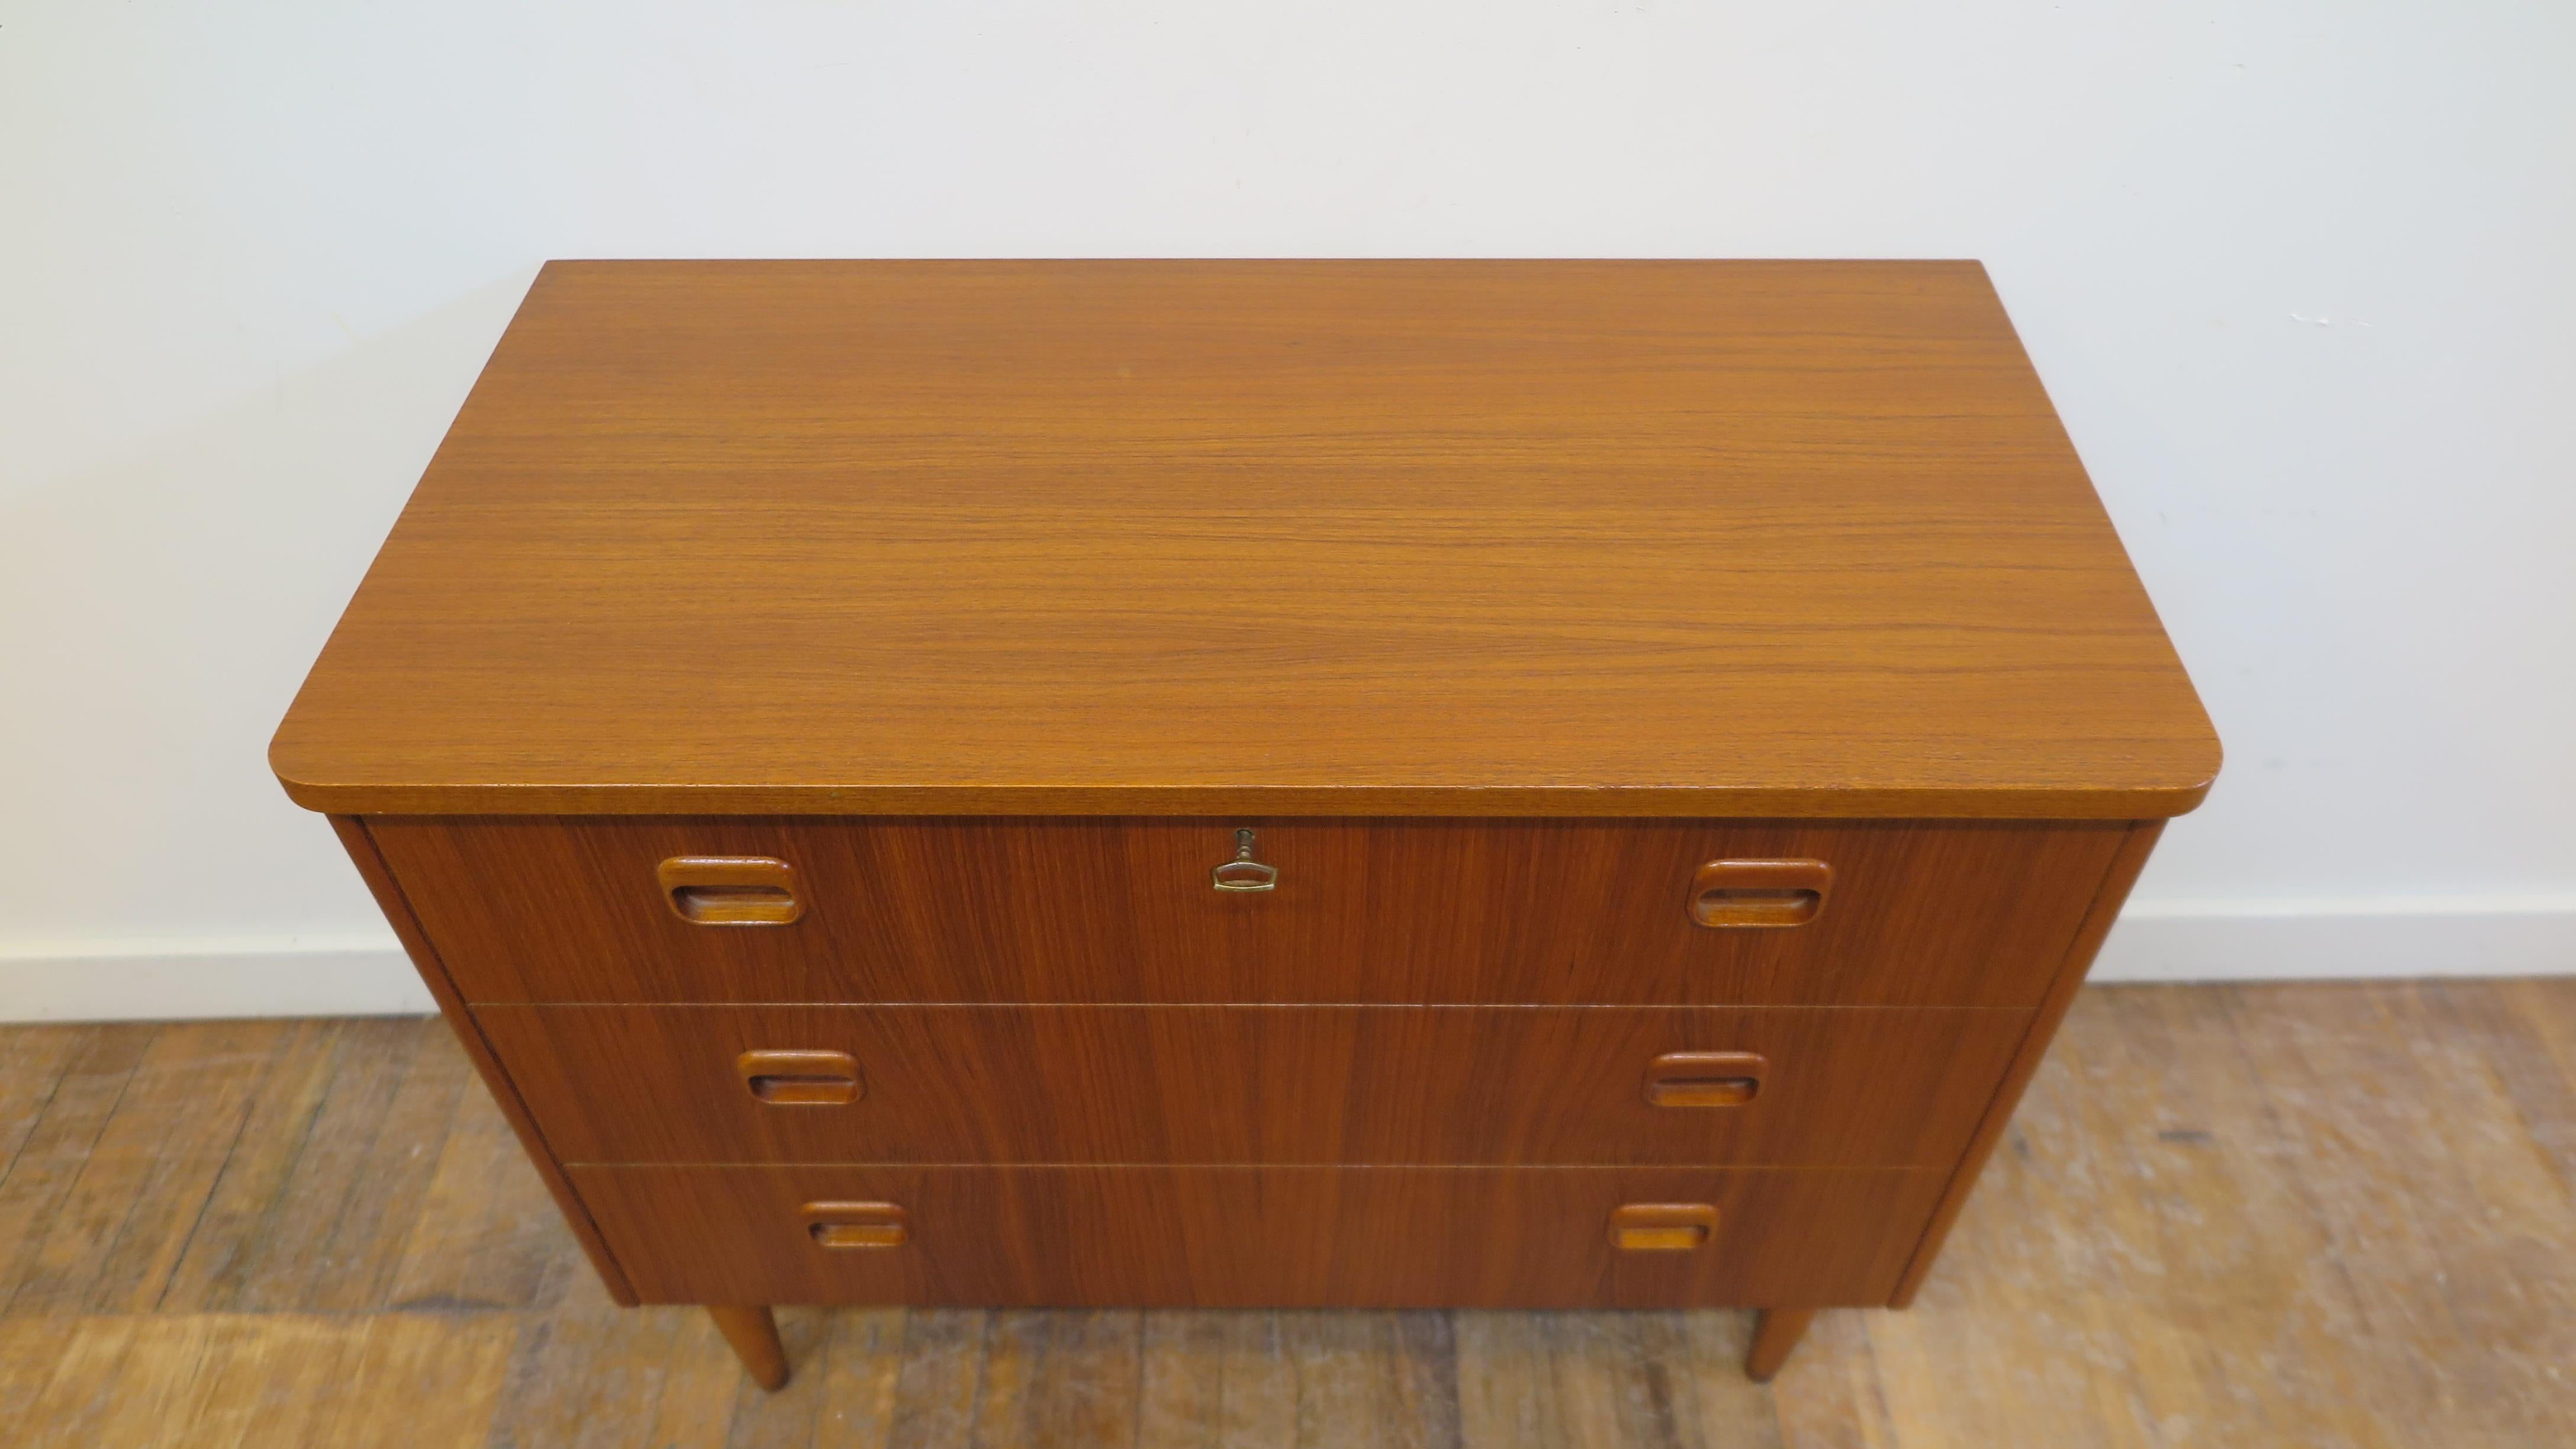 Scandinavian Modern mid century teak chest of drawers. Scandinavian Modern teak veneer chest of three drawers with top drawer lock and key, beach wood legs. Very good condition, clean inside and outside.